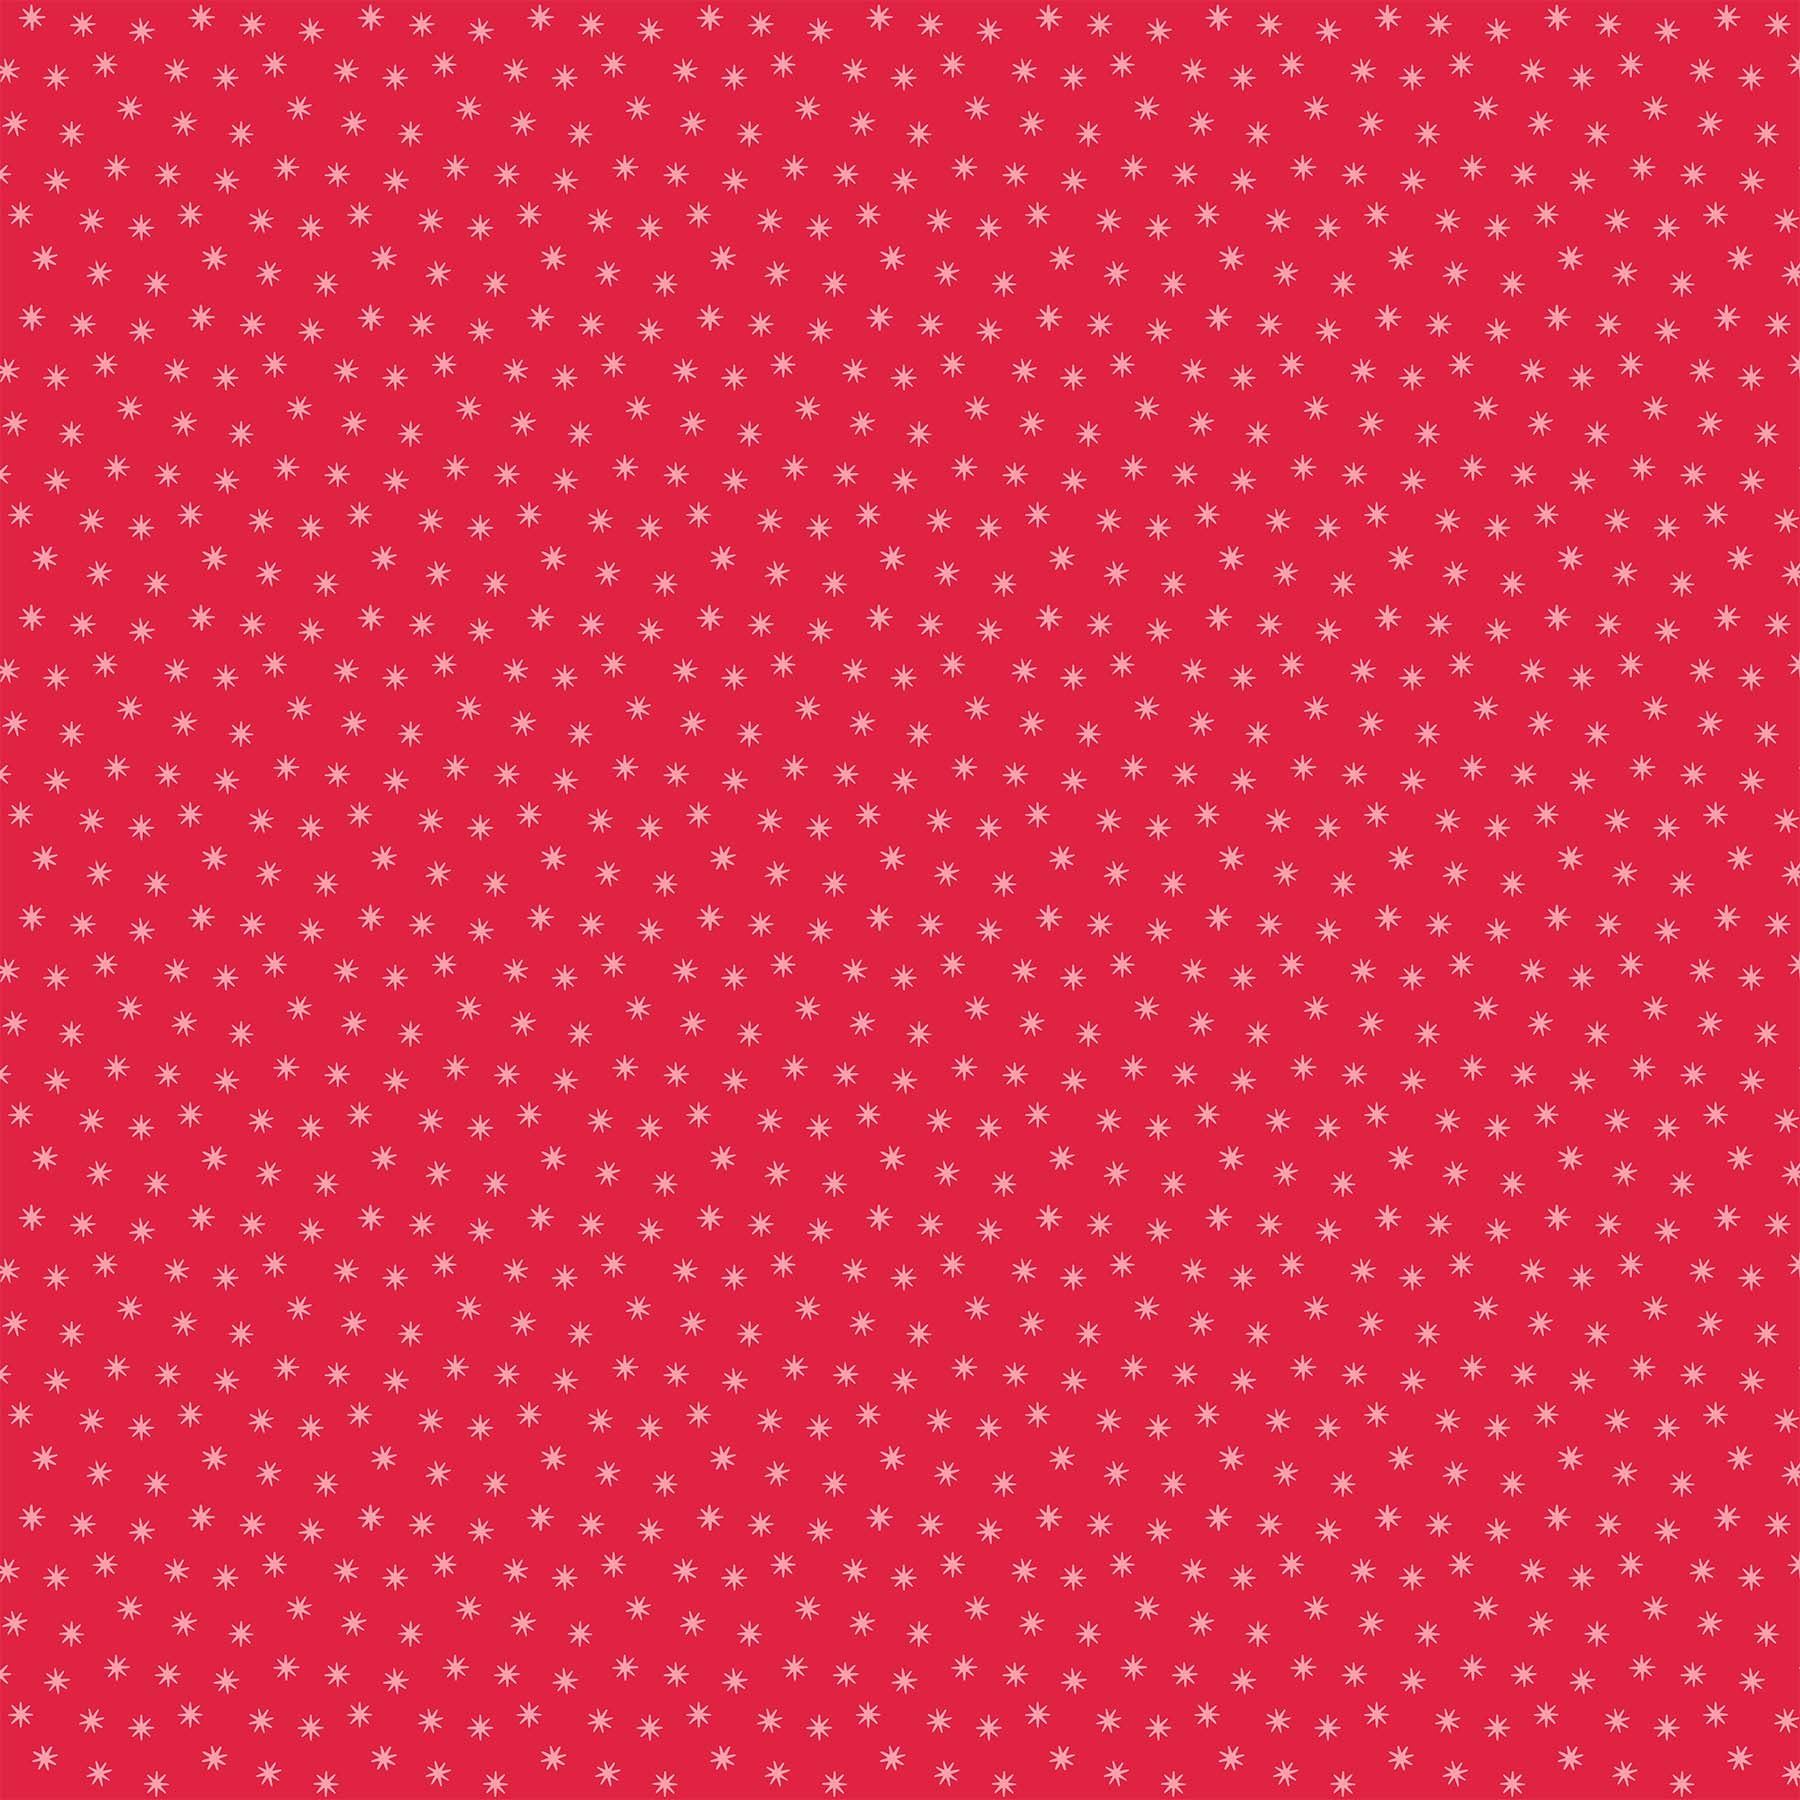 Fabric, Happiness Red 90599-26